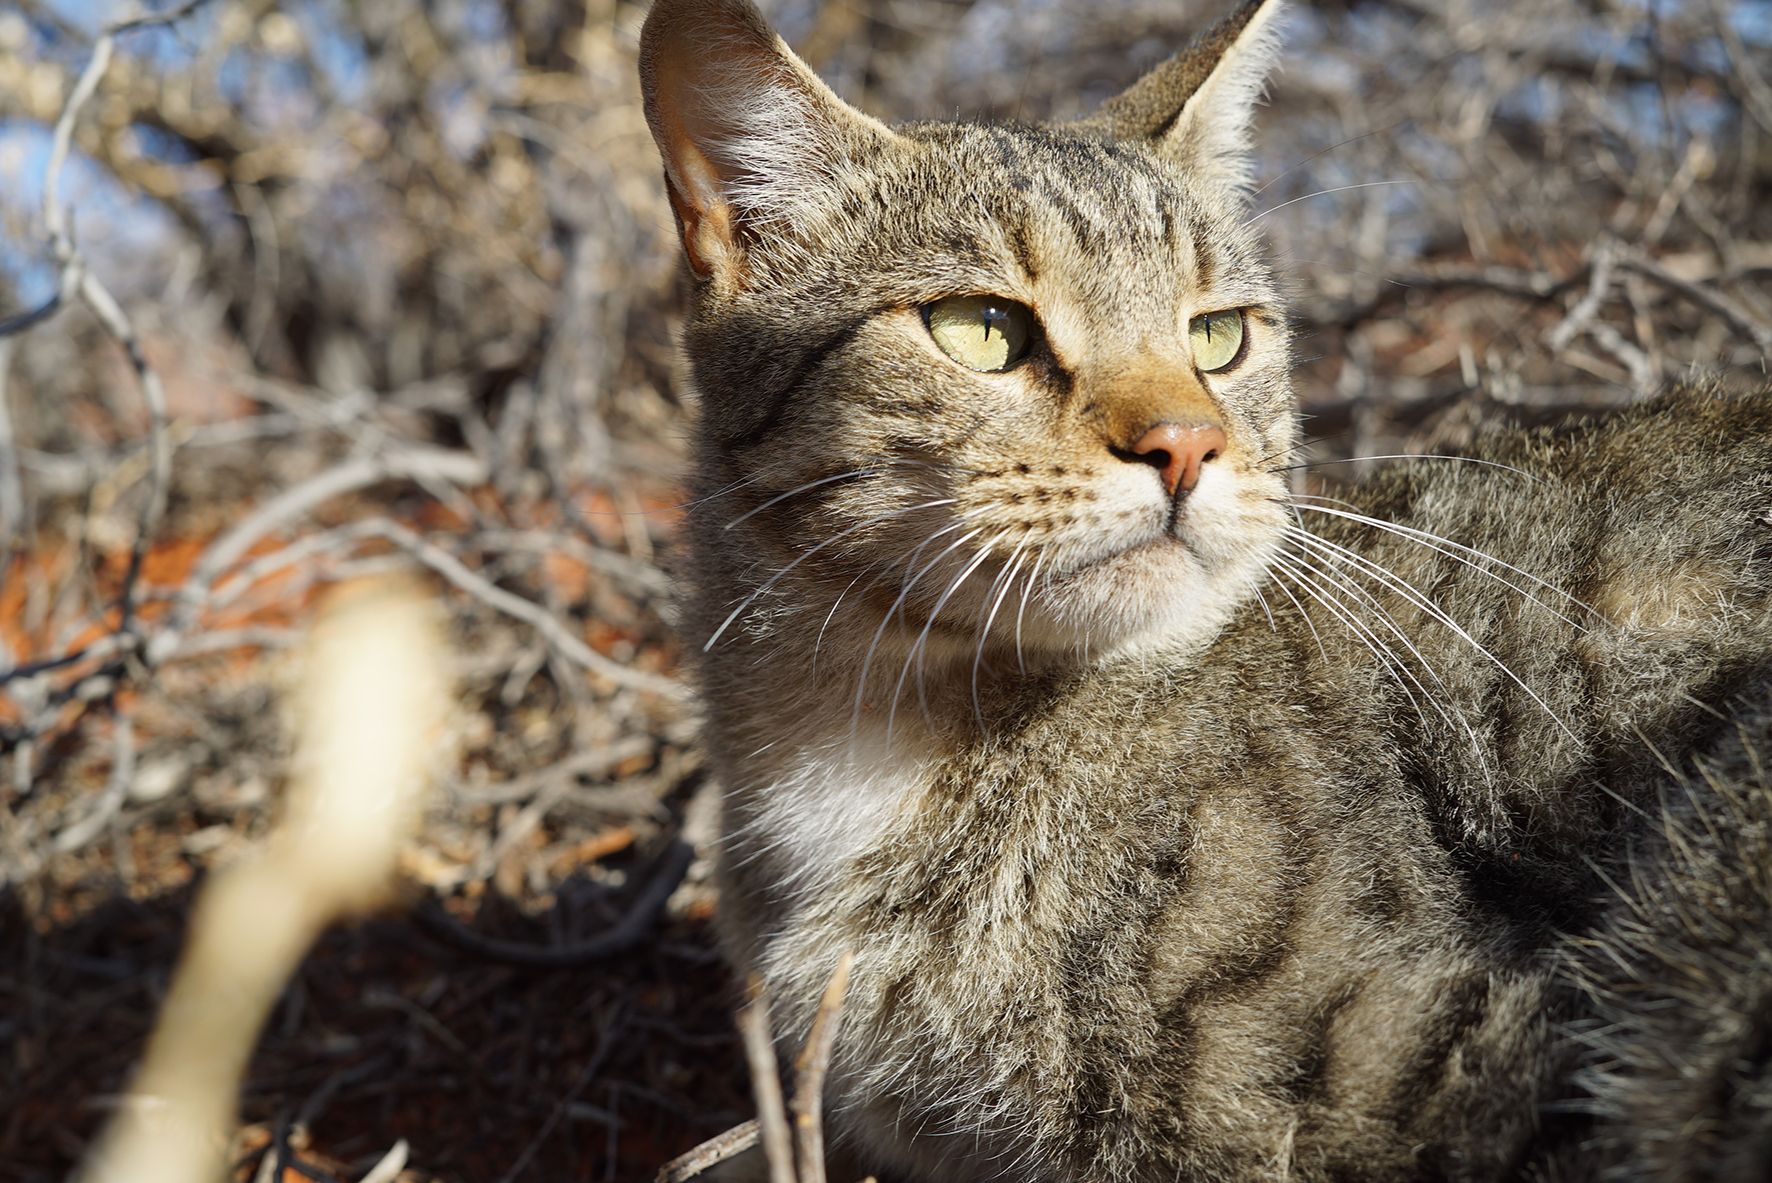 Terapi er nok Bliv Report recommends actions to save Australian wildlife from cats